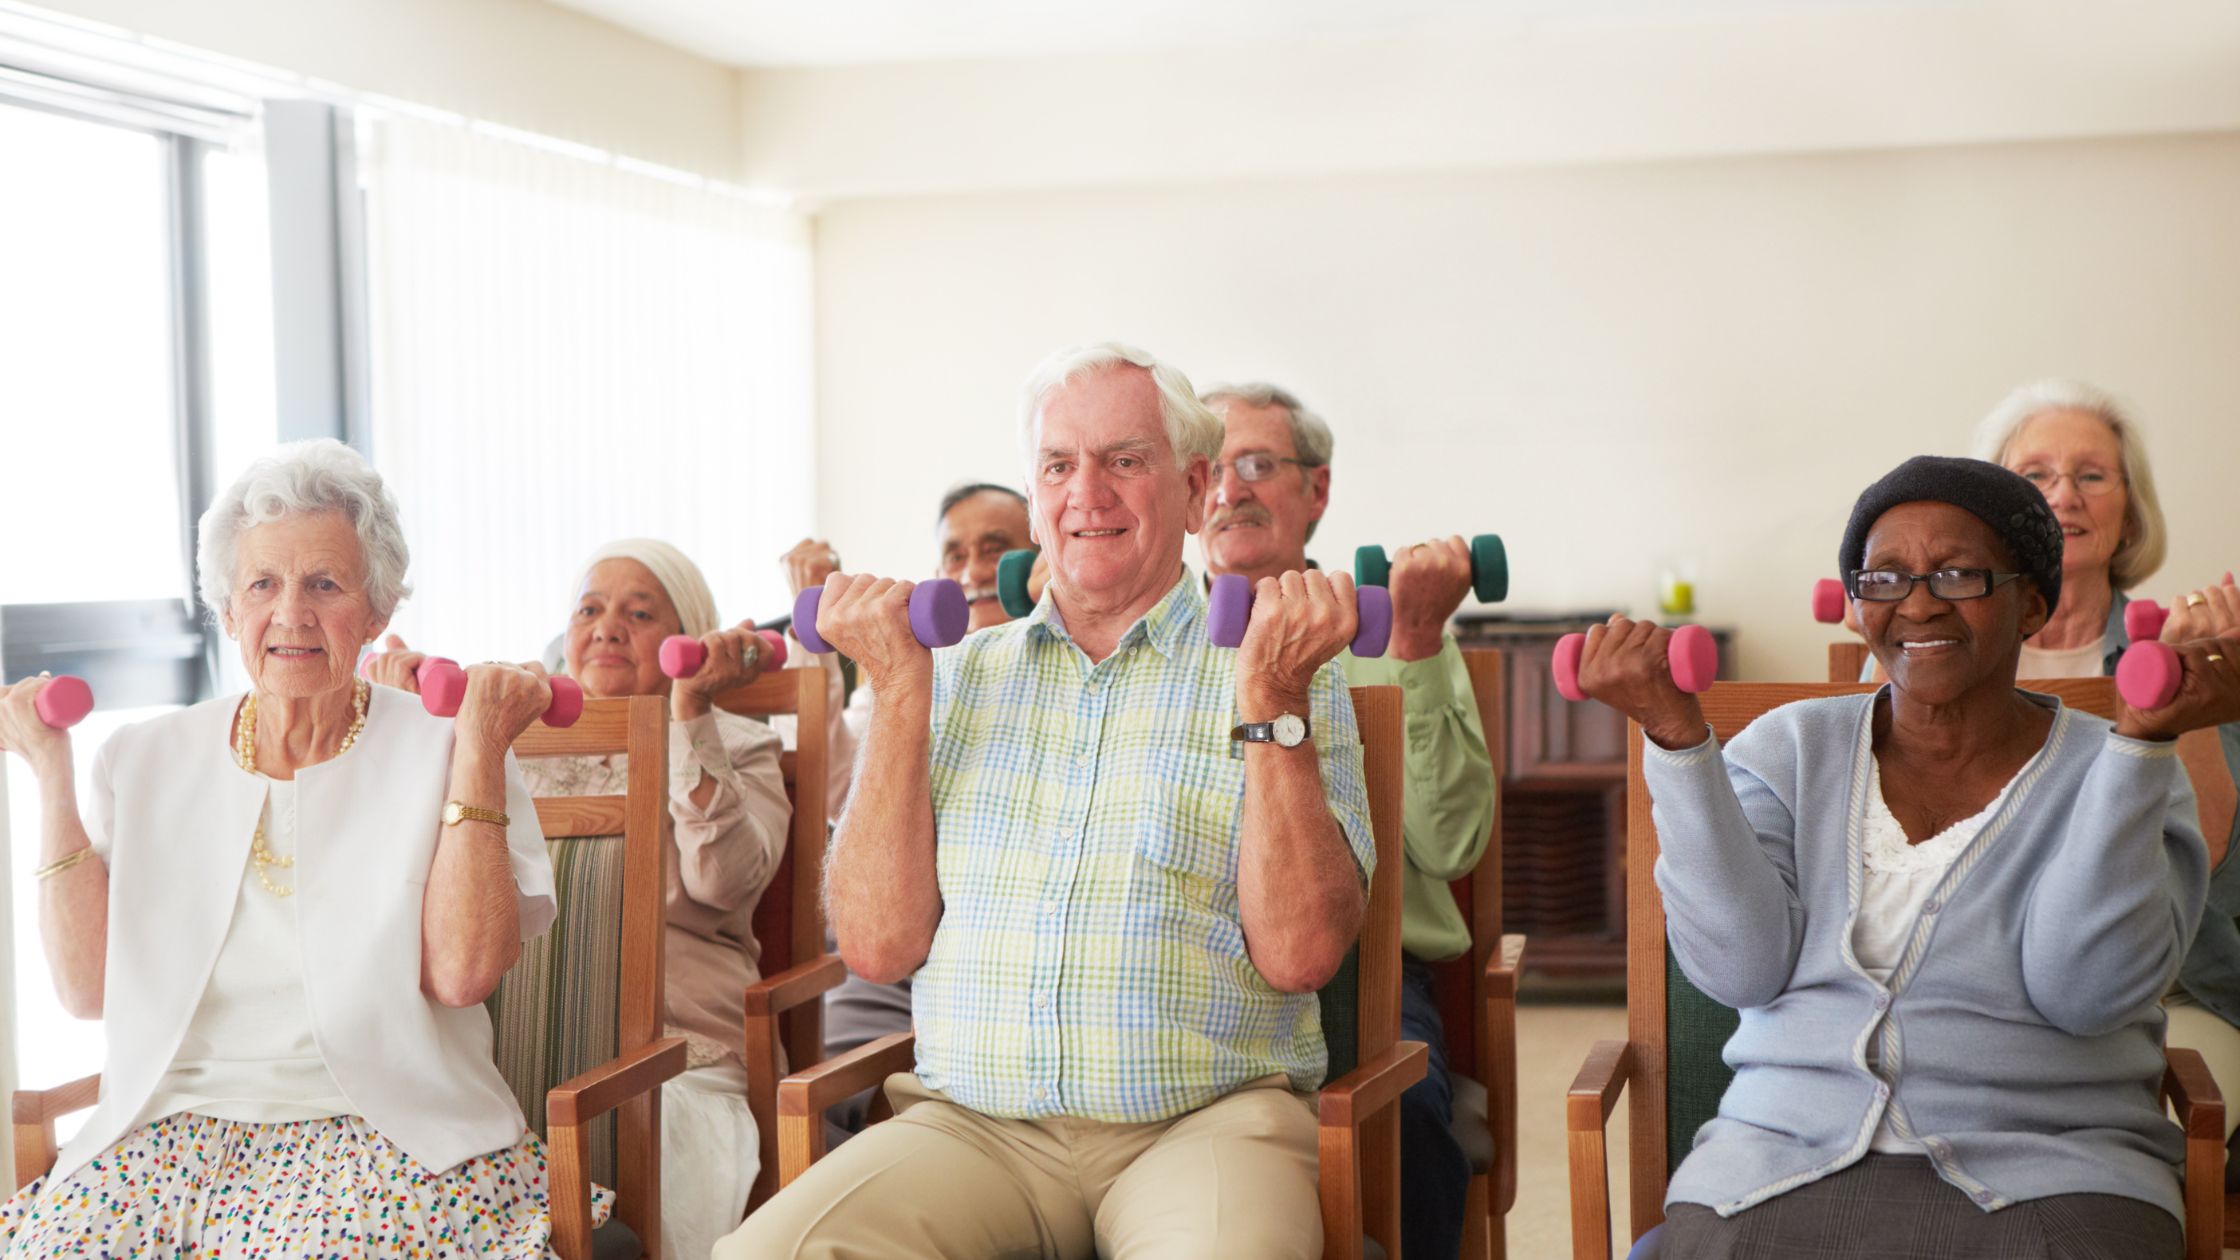 10-Minute Chair Exercises for Seniors for a Healthy Lifestyle